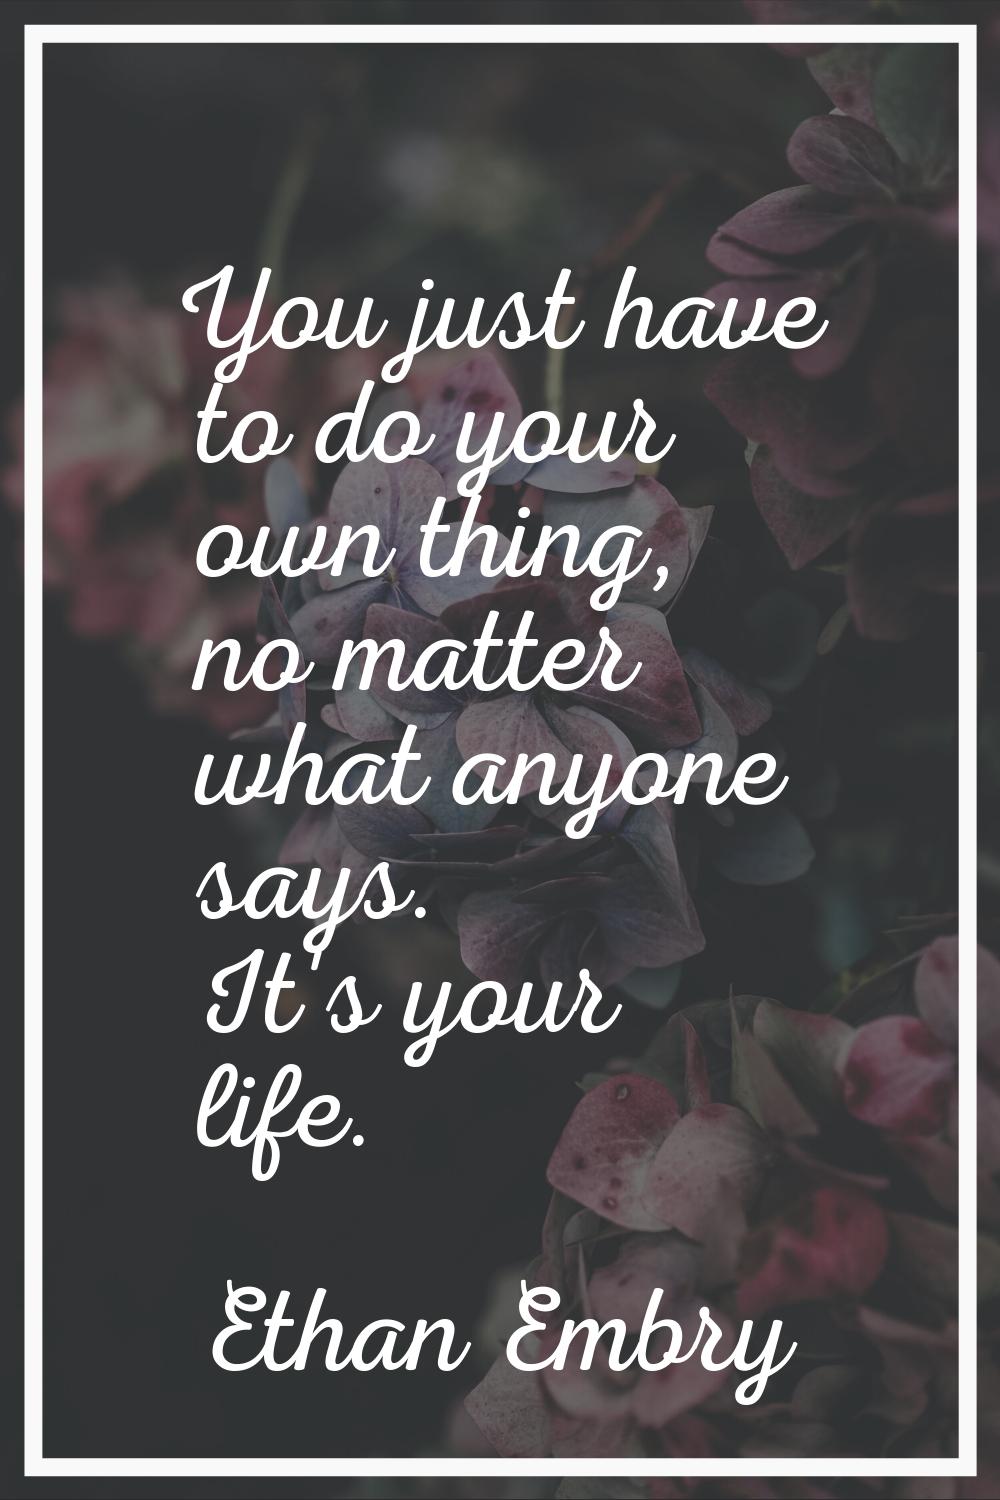 You just have to do your own thing, no matter what anyone says. It's your life.